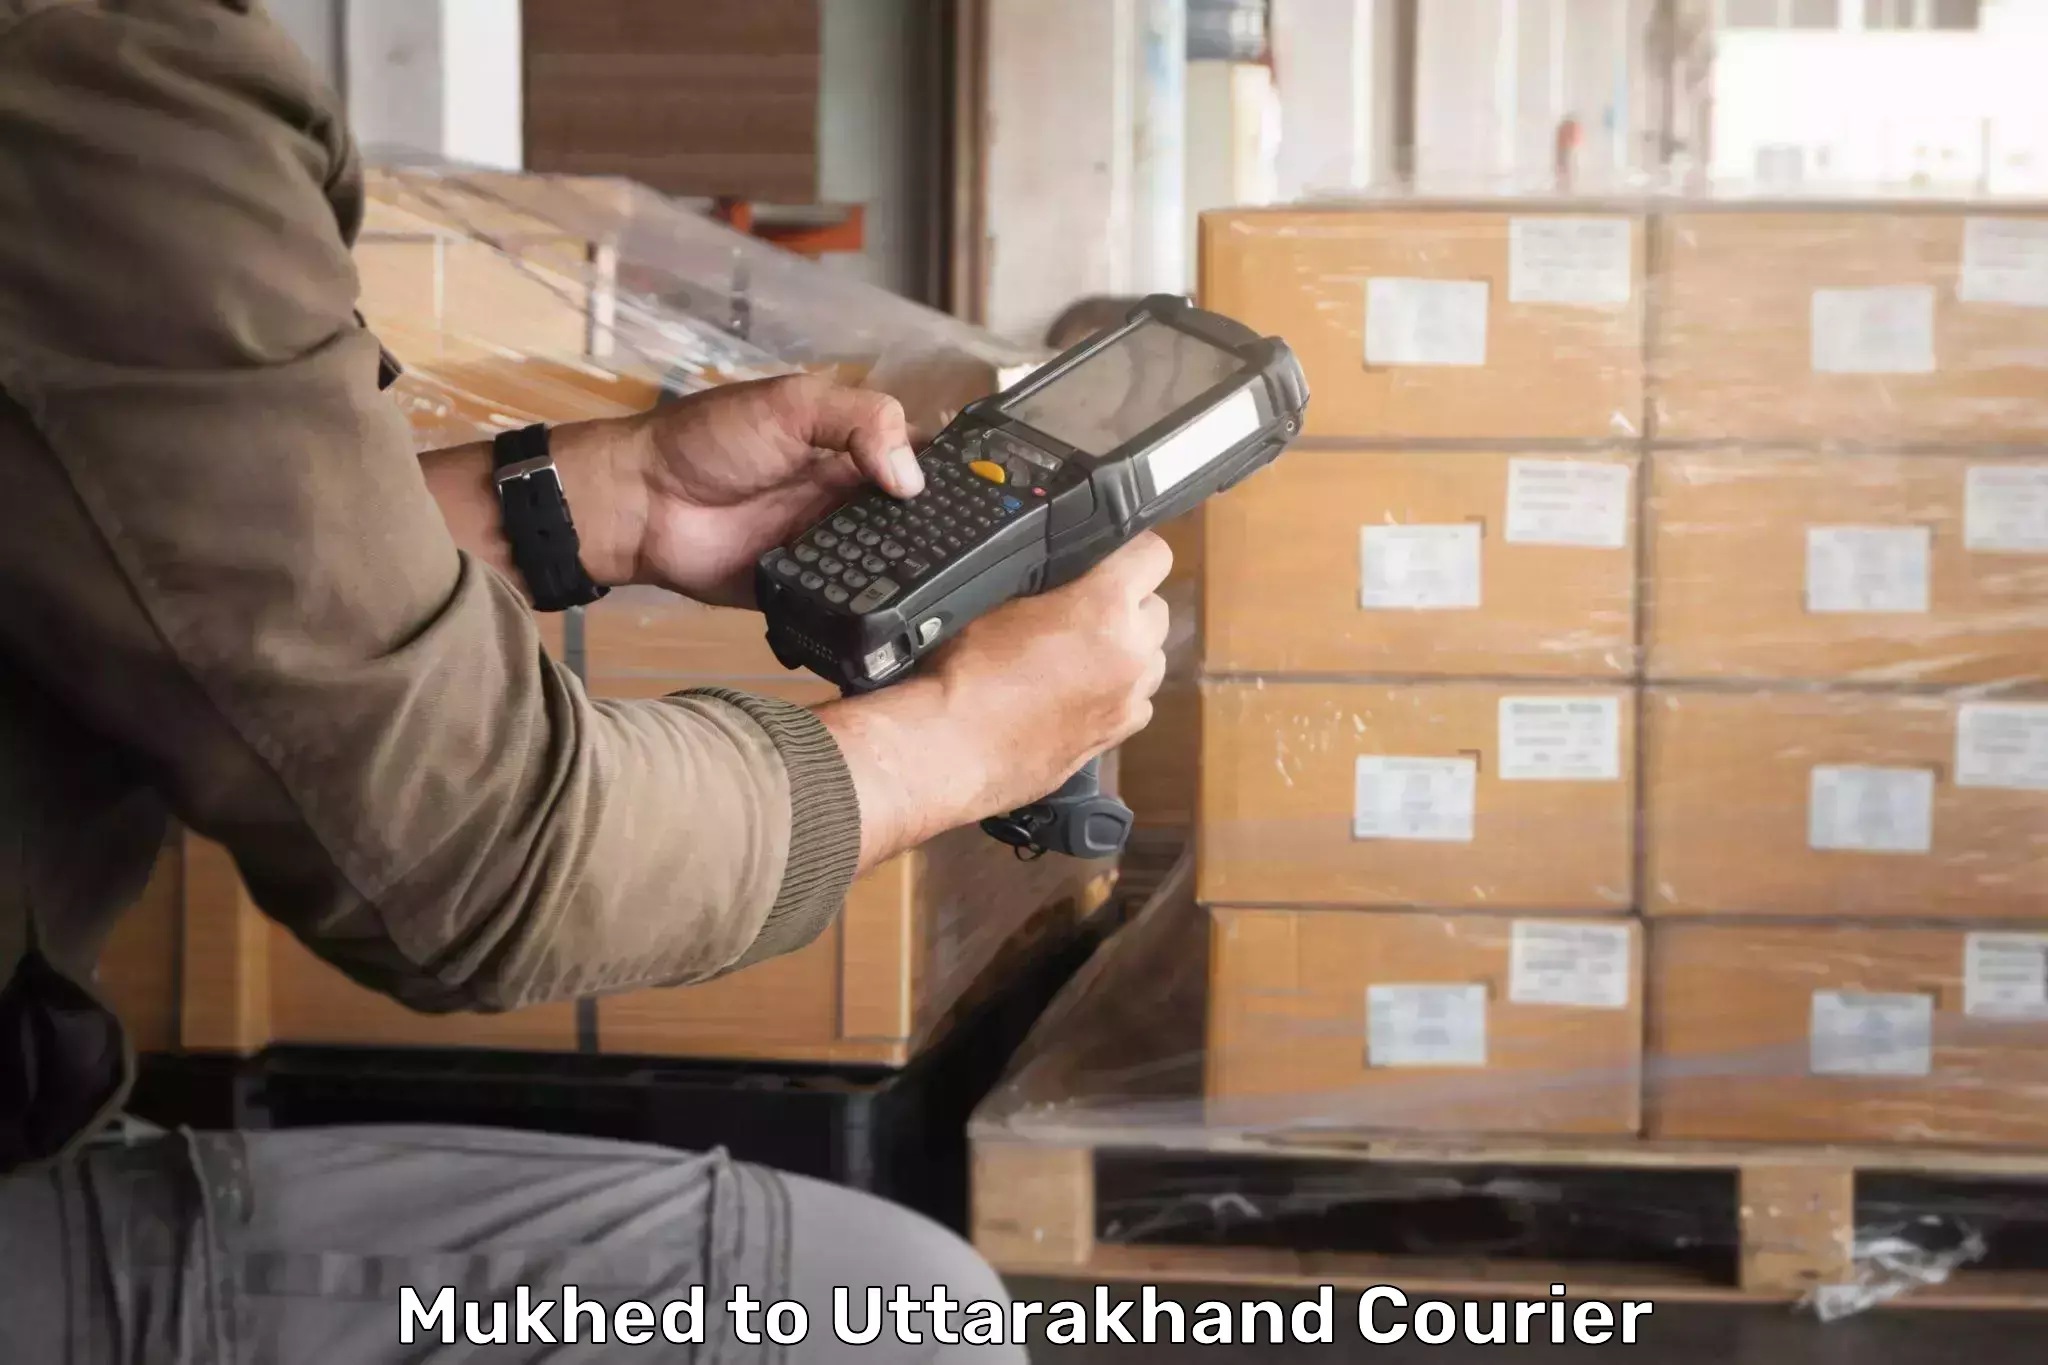 Reliable package handling Mukhed to Uttarakhand